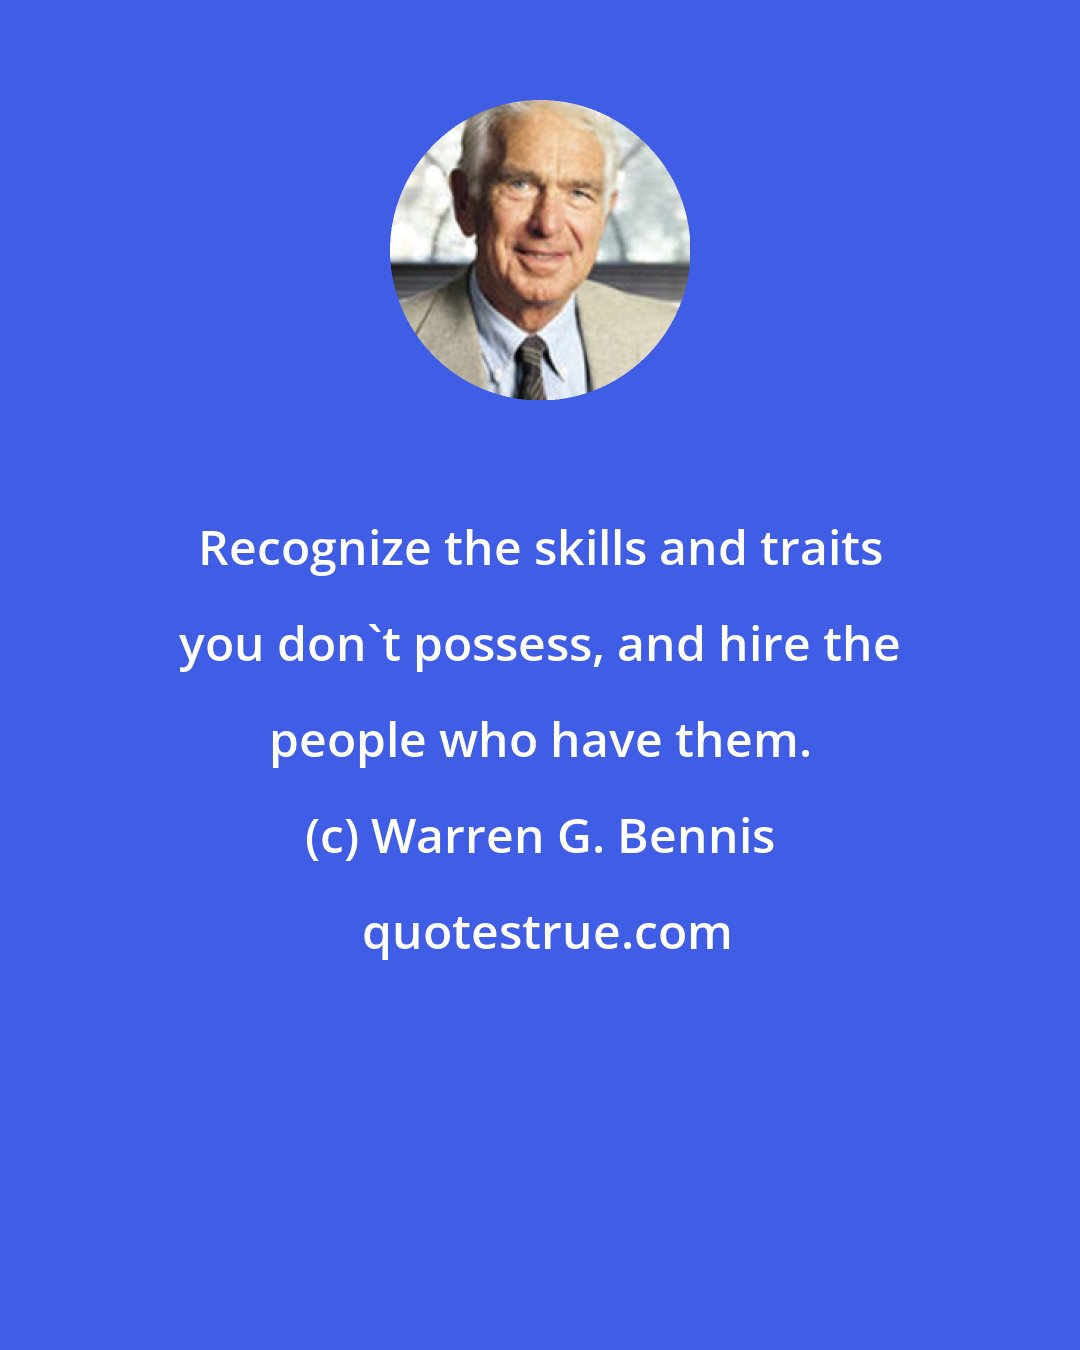 Warren G. Bennis: Recognize the skills and traits you don't possess, and hire the people who have them.